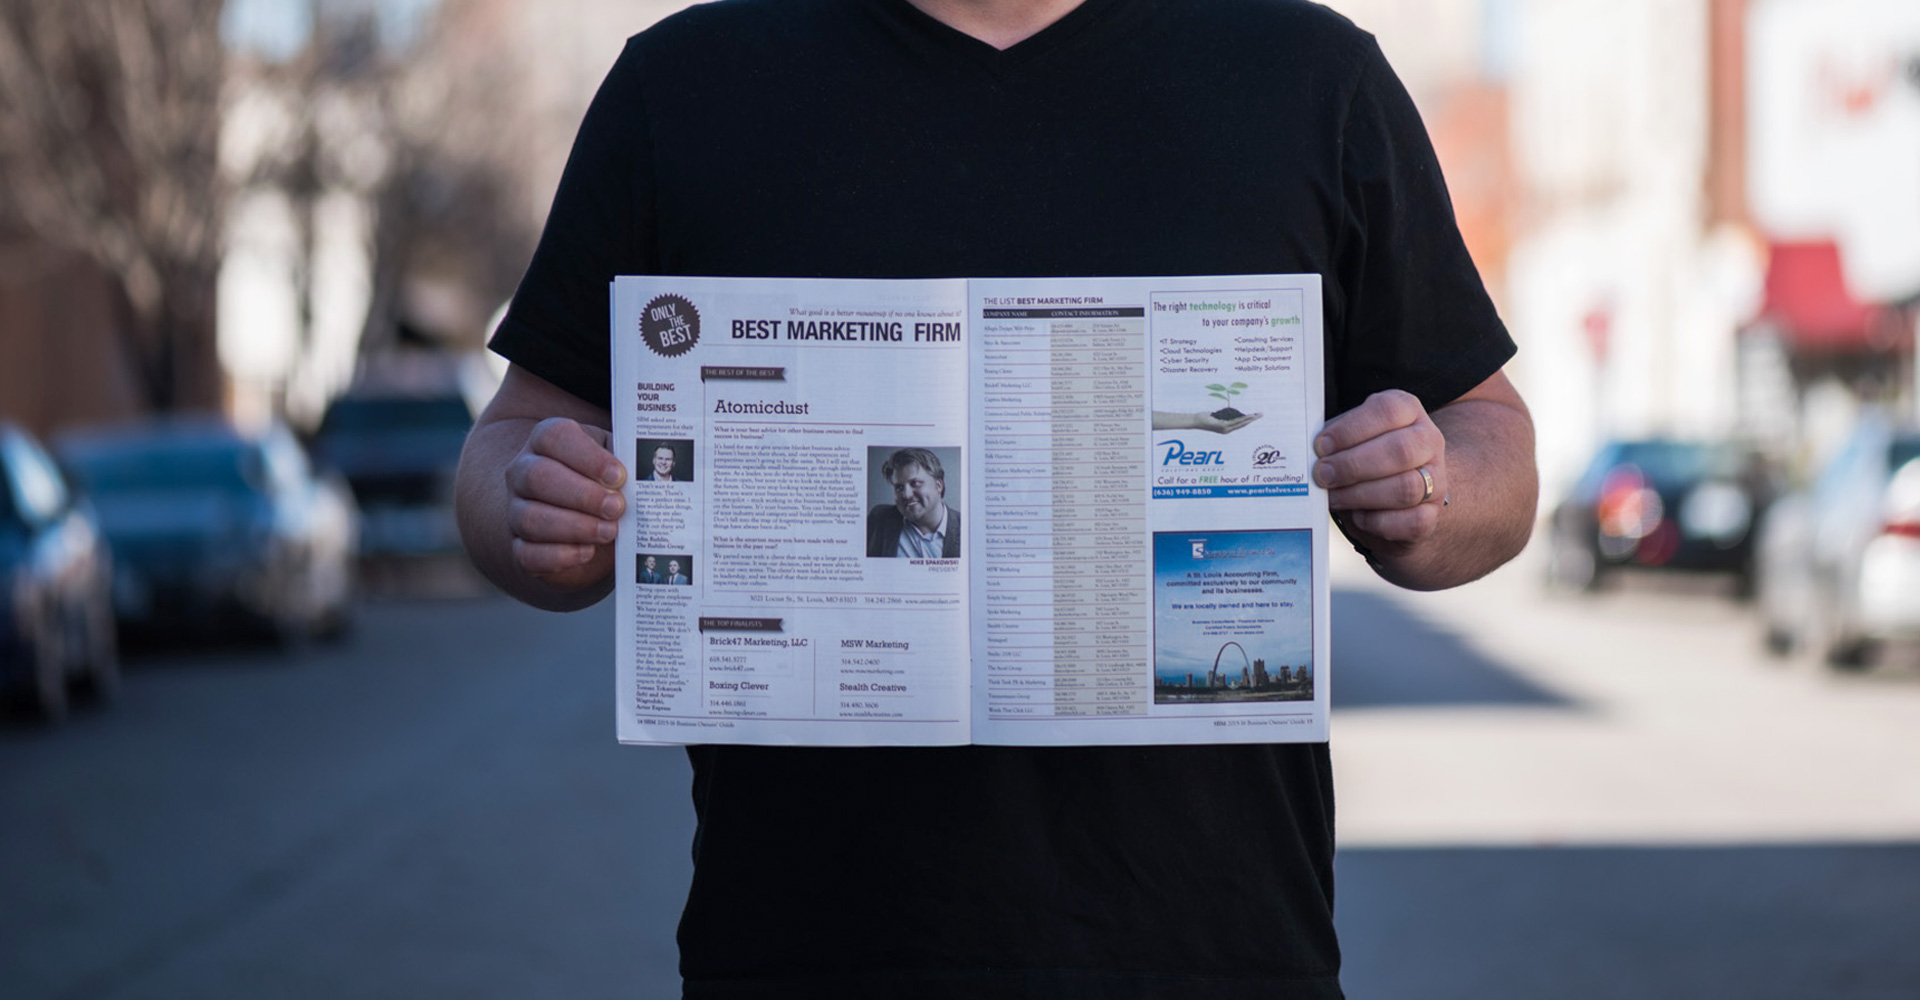 Atomicdust Creative Director Mike Spakowski holds a Small Business Monthly issue open to the Best Marketing Firm St.Louis page in the middle of the street.